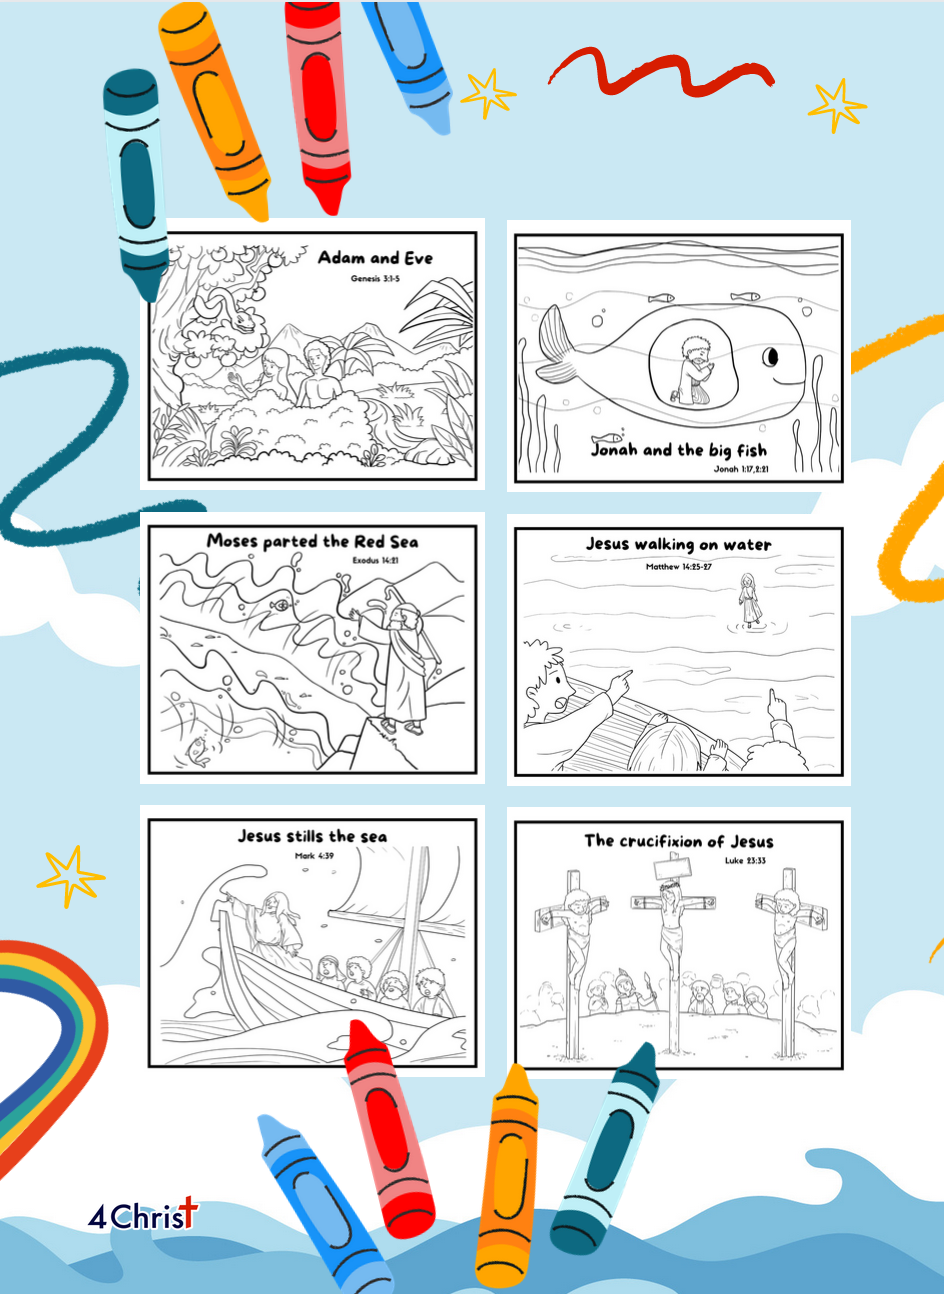 The Bible Coloring Book for Children